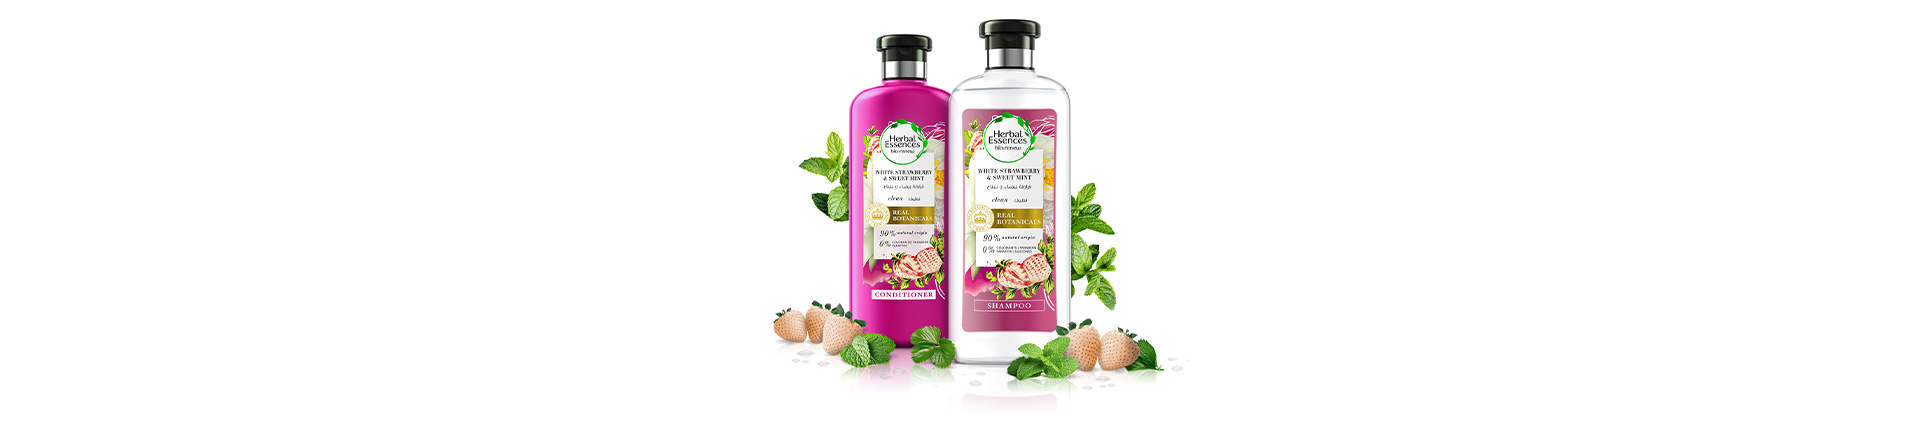 Bottles of Herbal Essences Shampoo & Conditioner White Strawberry & Sweet Mint Collection